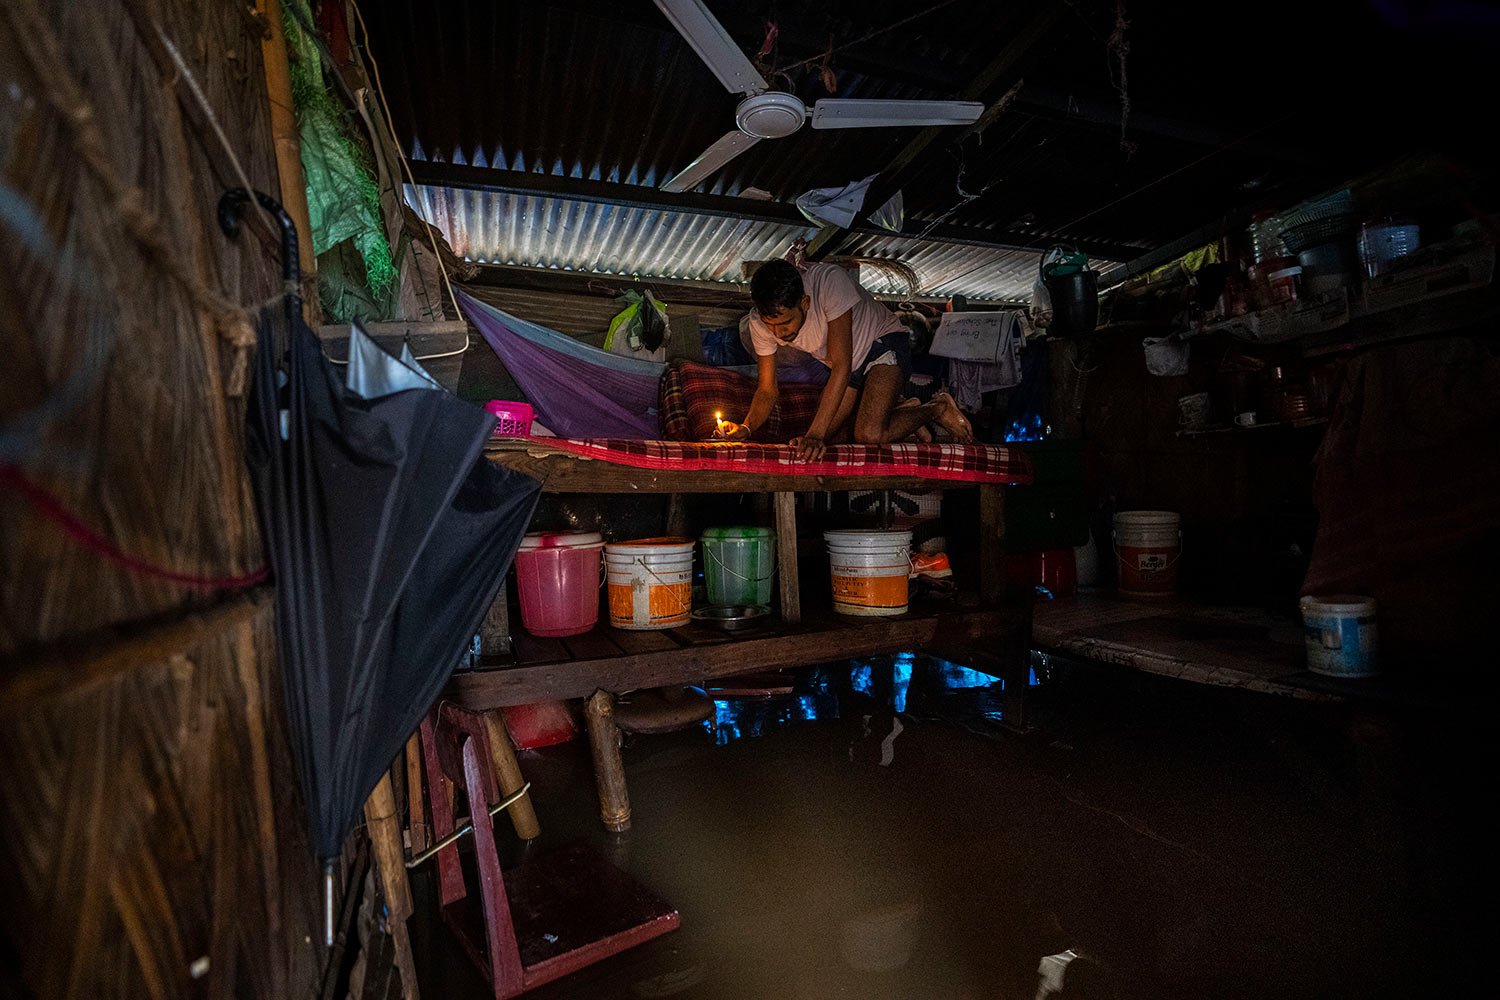  A man holds a candle and prepares to eat  a meal in his waterlogged house after continuous rainfall in Gauhati, India, Wednesday, June 15, 2022. (AP Photo/Anupam Nath) 